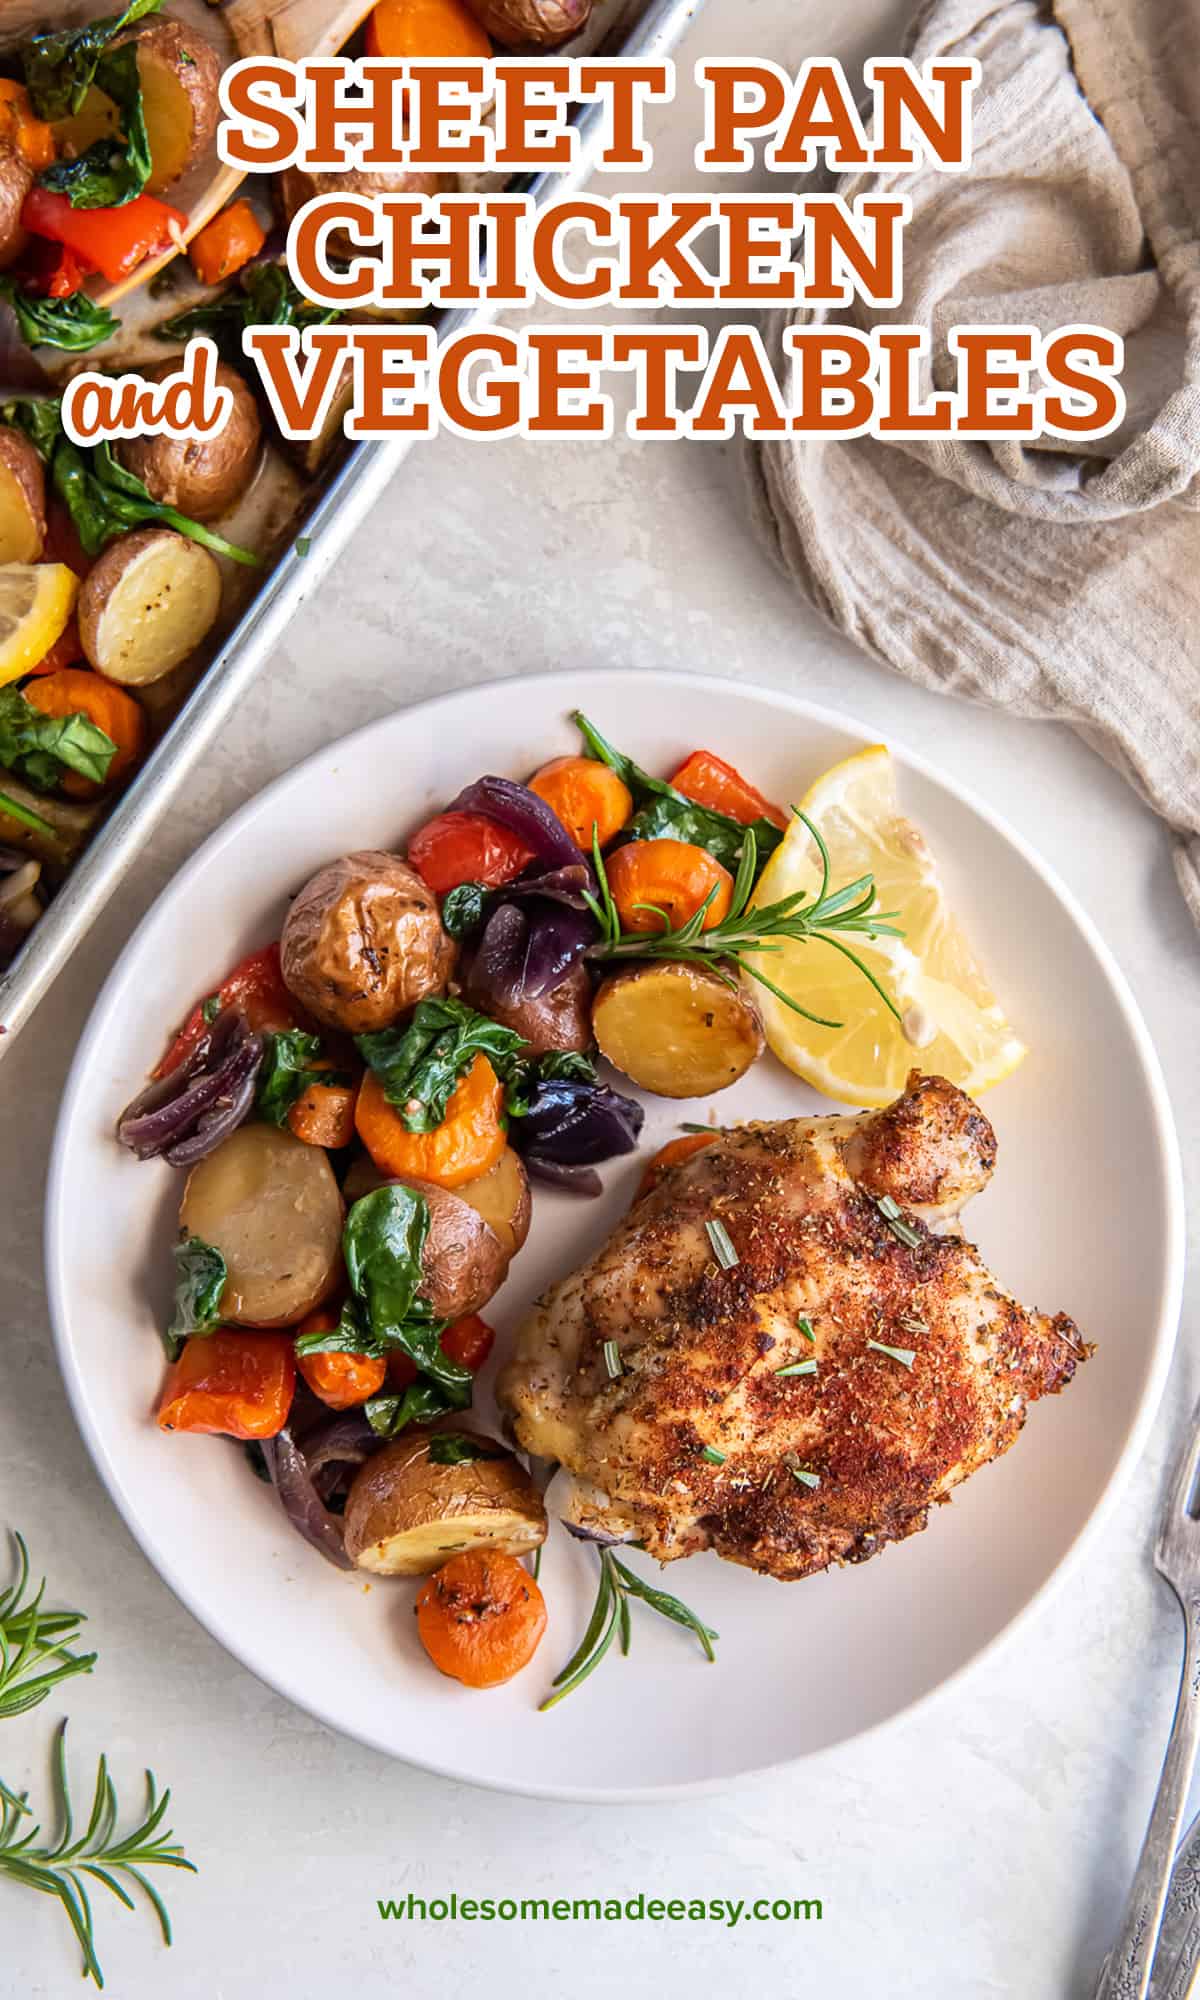 A top down shot of roasted chicken and vegetables on a white plate with lemon slices and freh herbs with text.